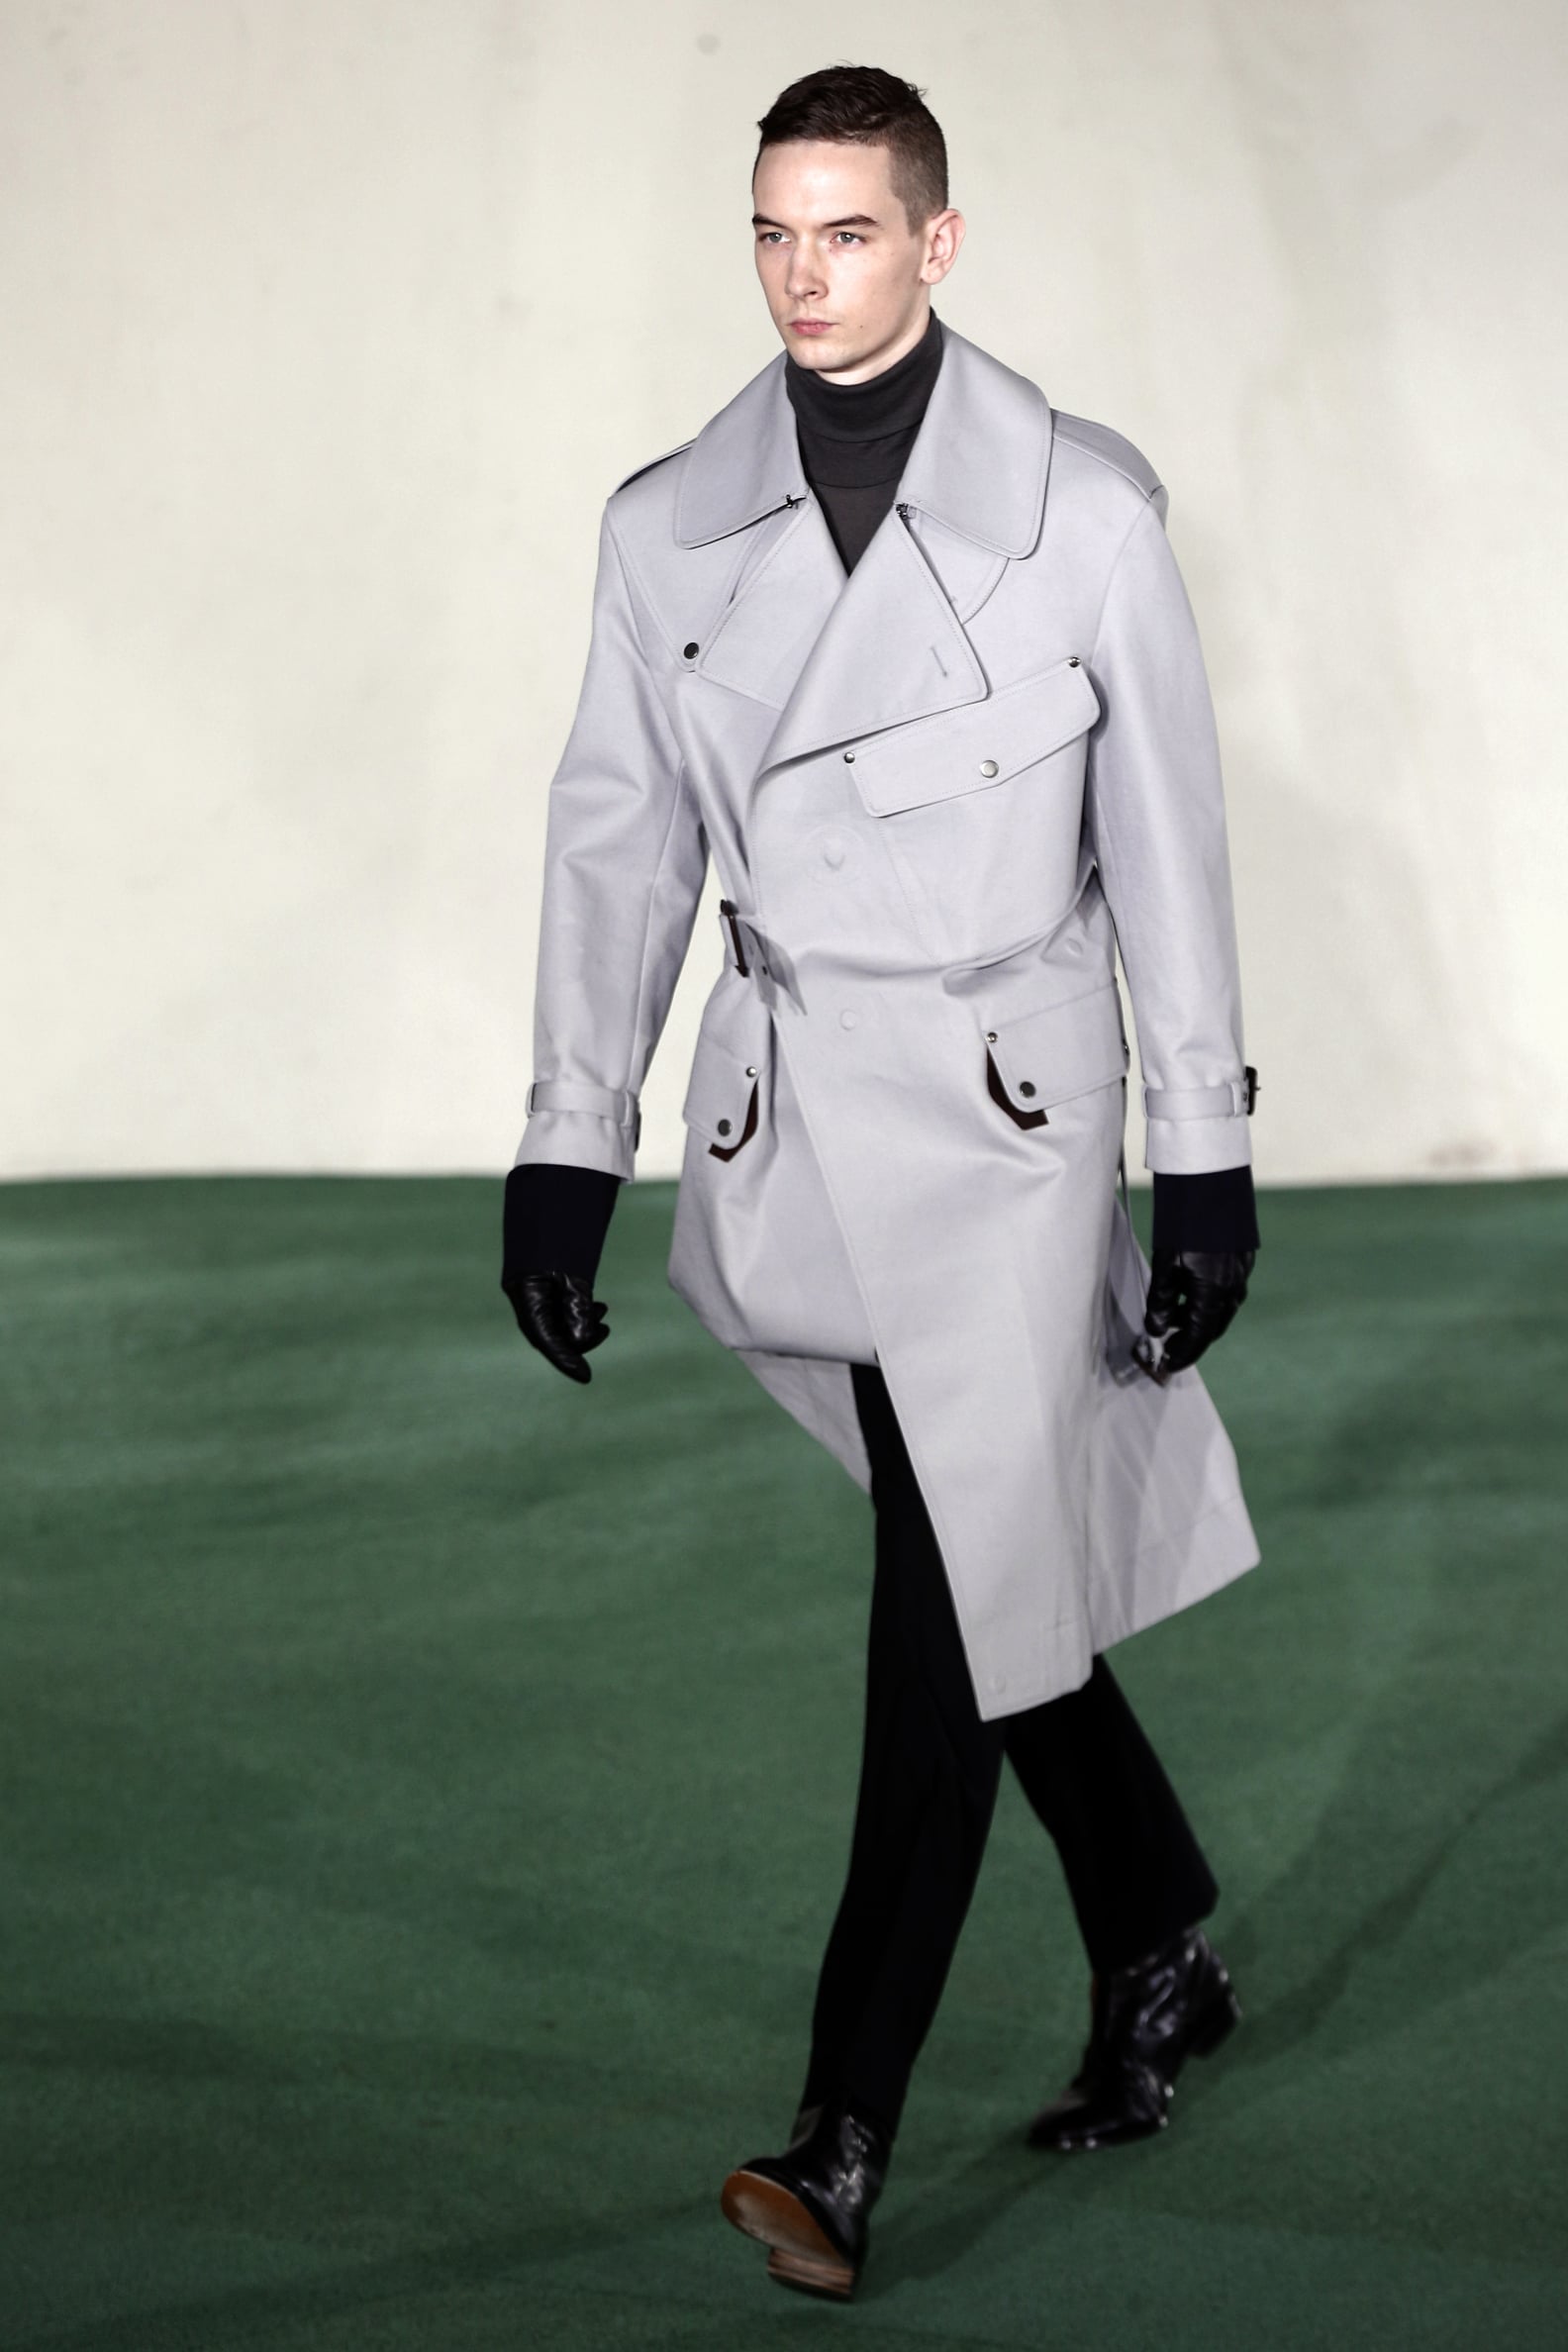 Best Looks From Men's Fashion Week Fall 2014 | Pictures | POPSUGAR Fashion